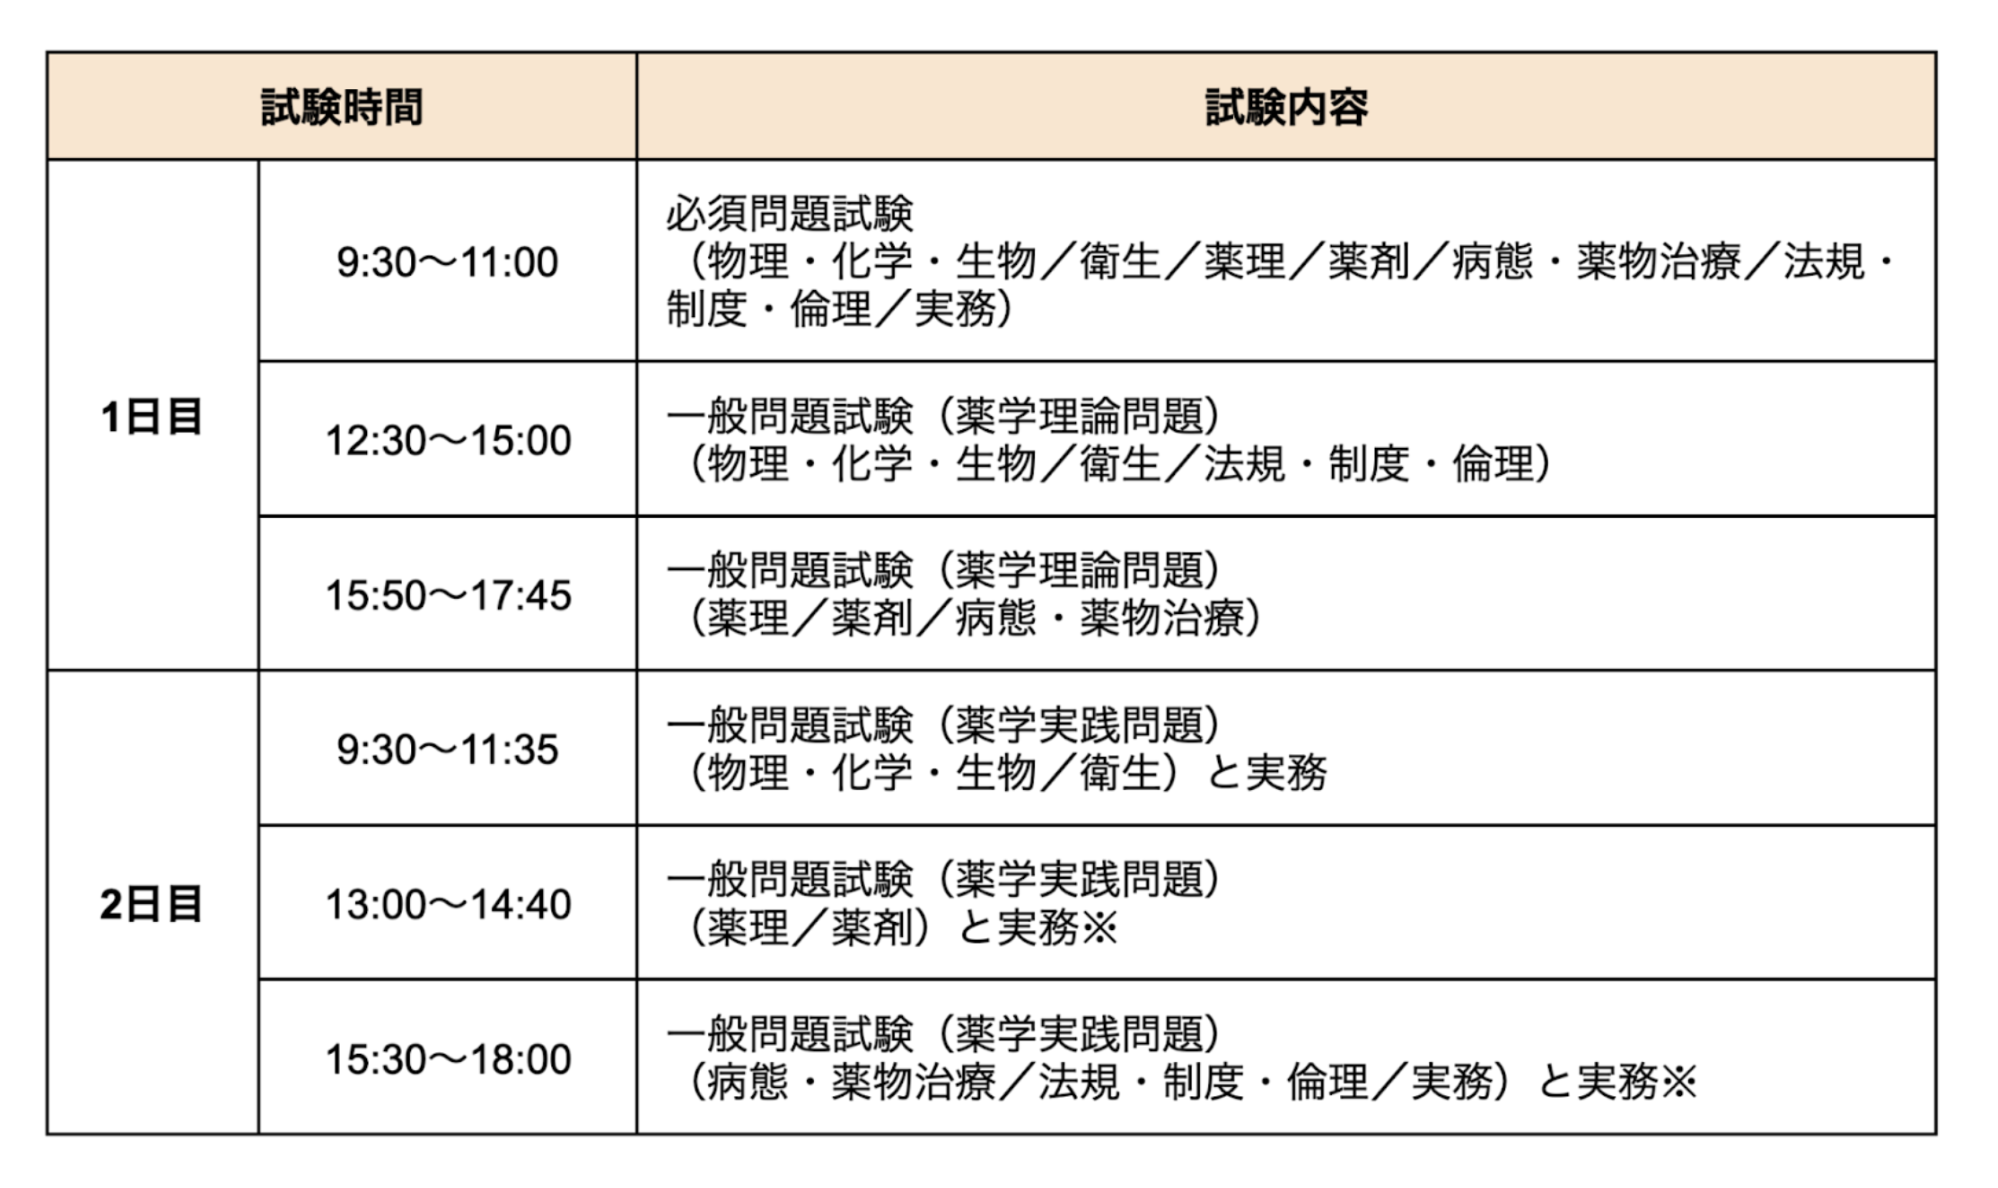 test-timetable.png